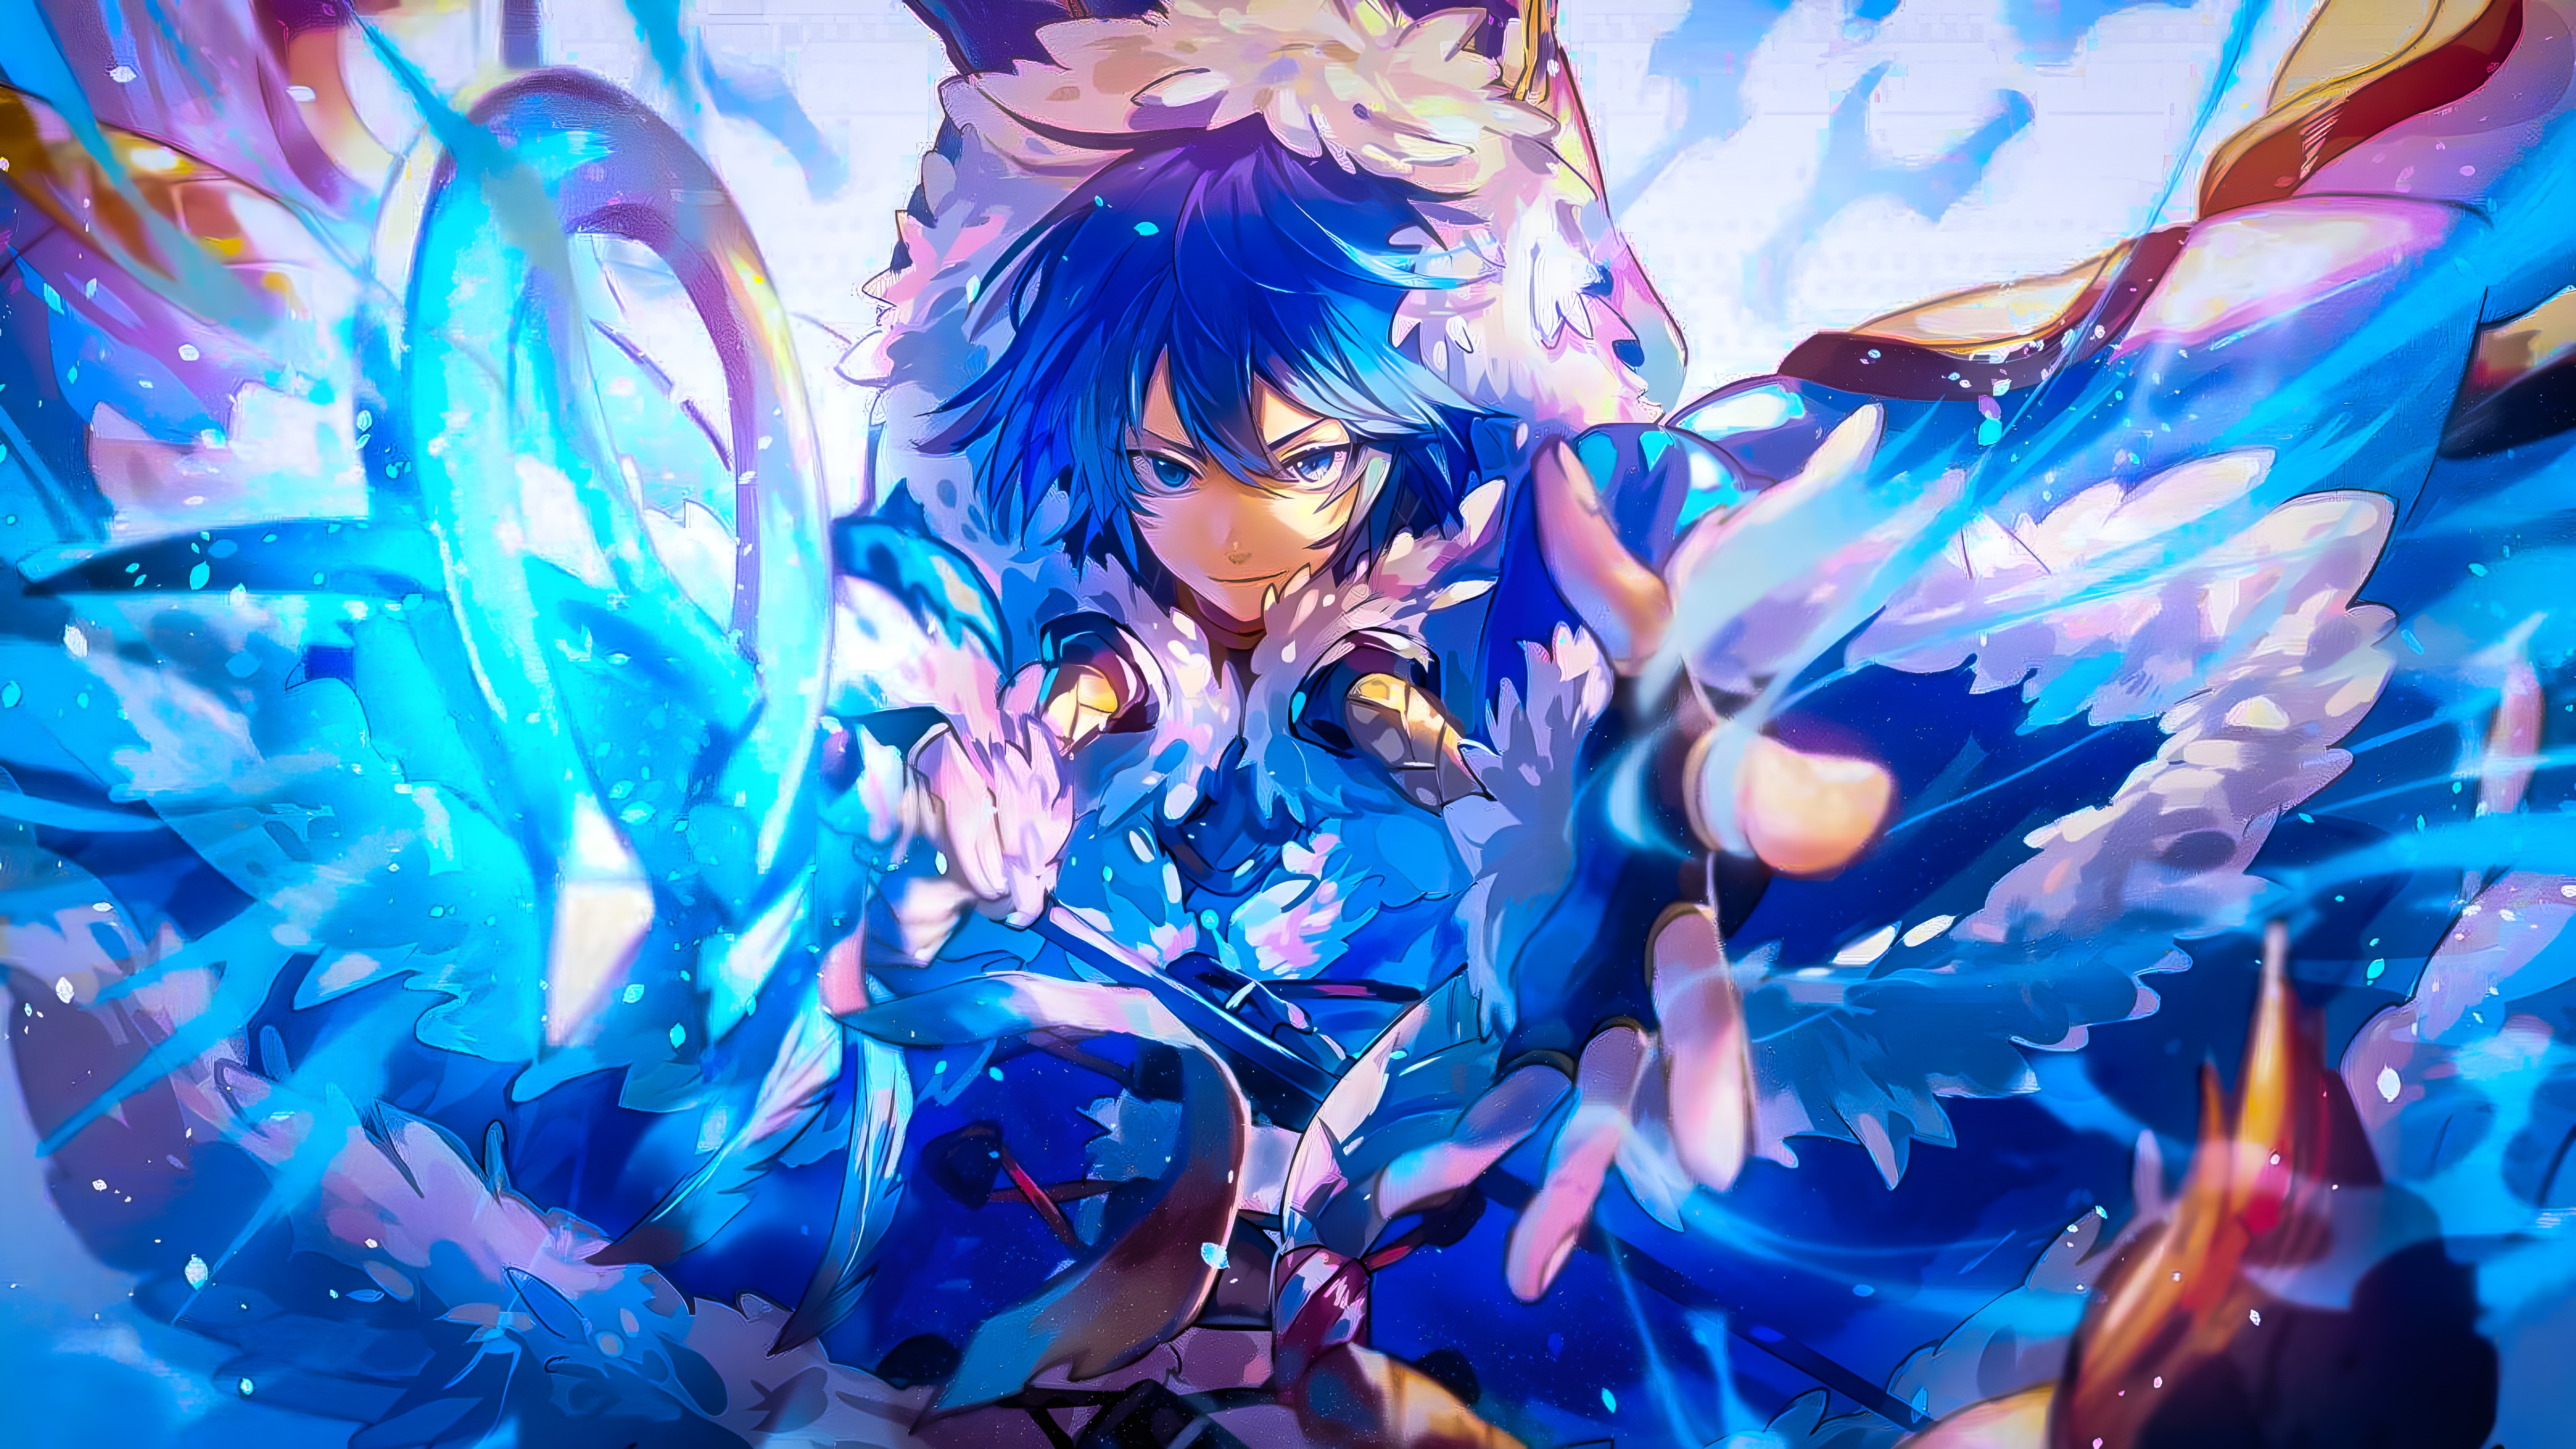 Blue Ice Blue Hair Cape Digital Art Blue Eyes Smiling Looking At Viewer Arms Reaching Anime Boys 6400x3600